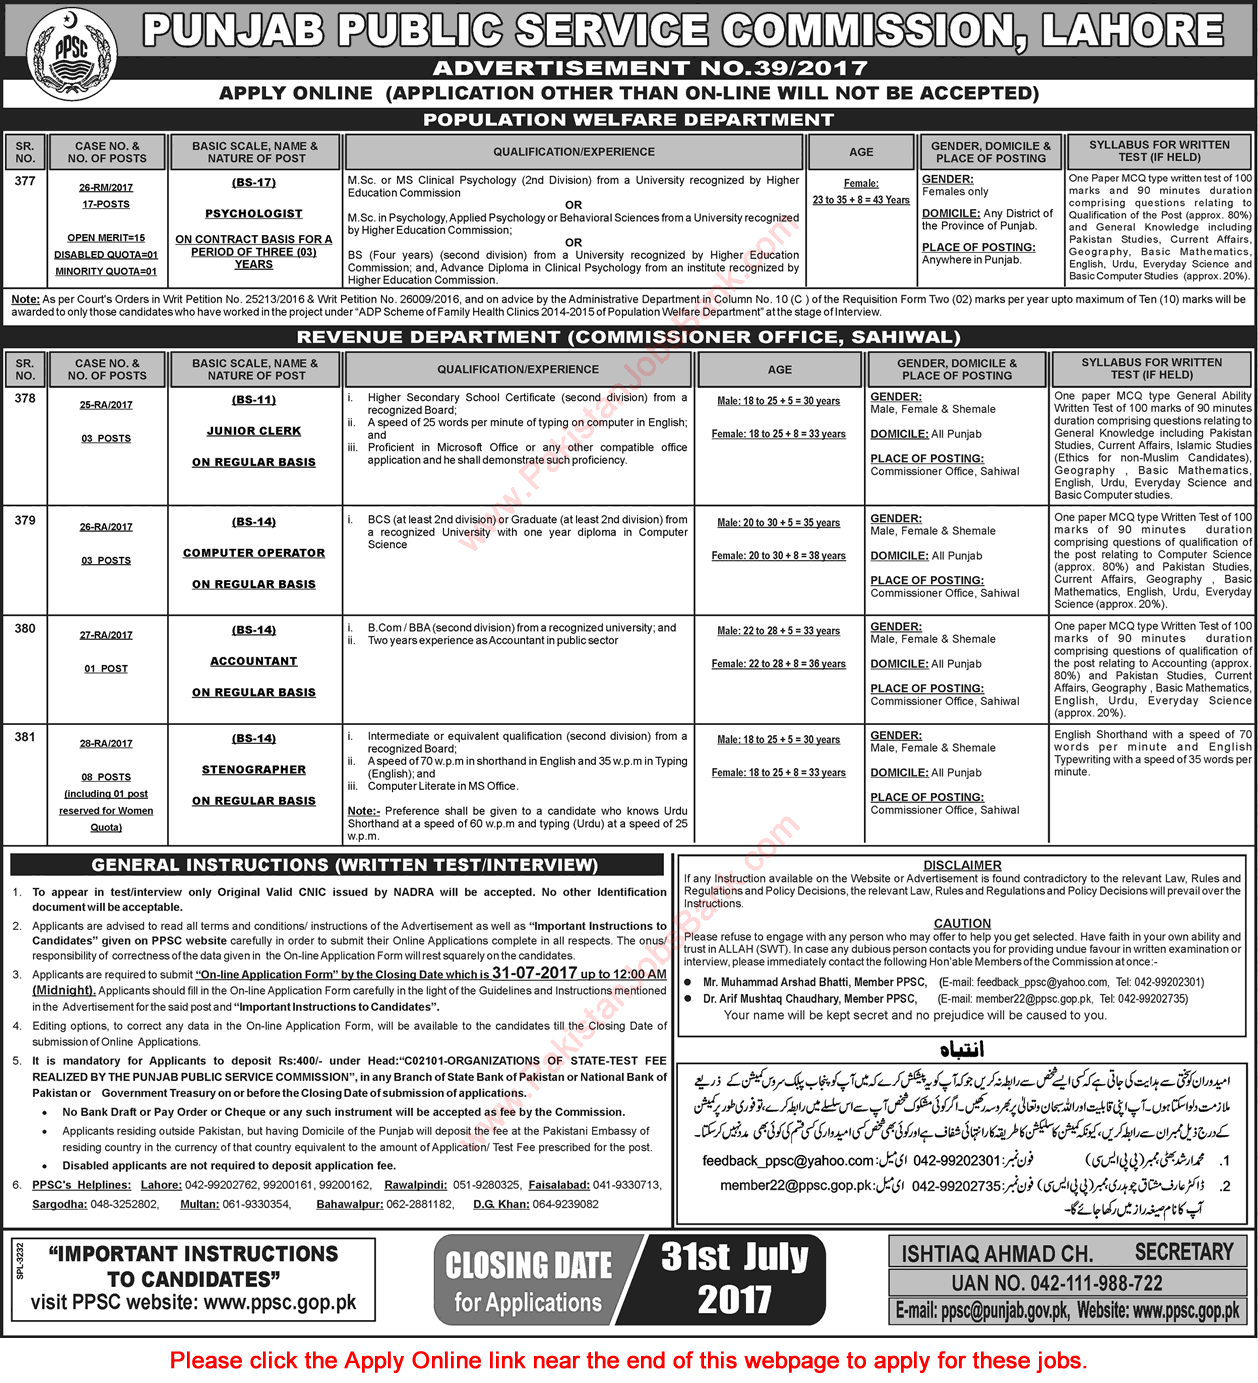 PPSC Jobs July 2017 Apply Online Consolidated Advertisement No 39/2017 Latest